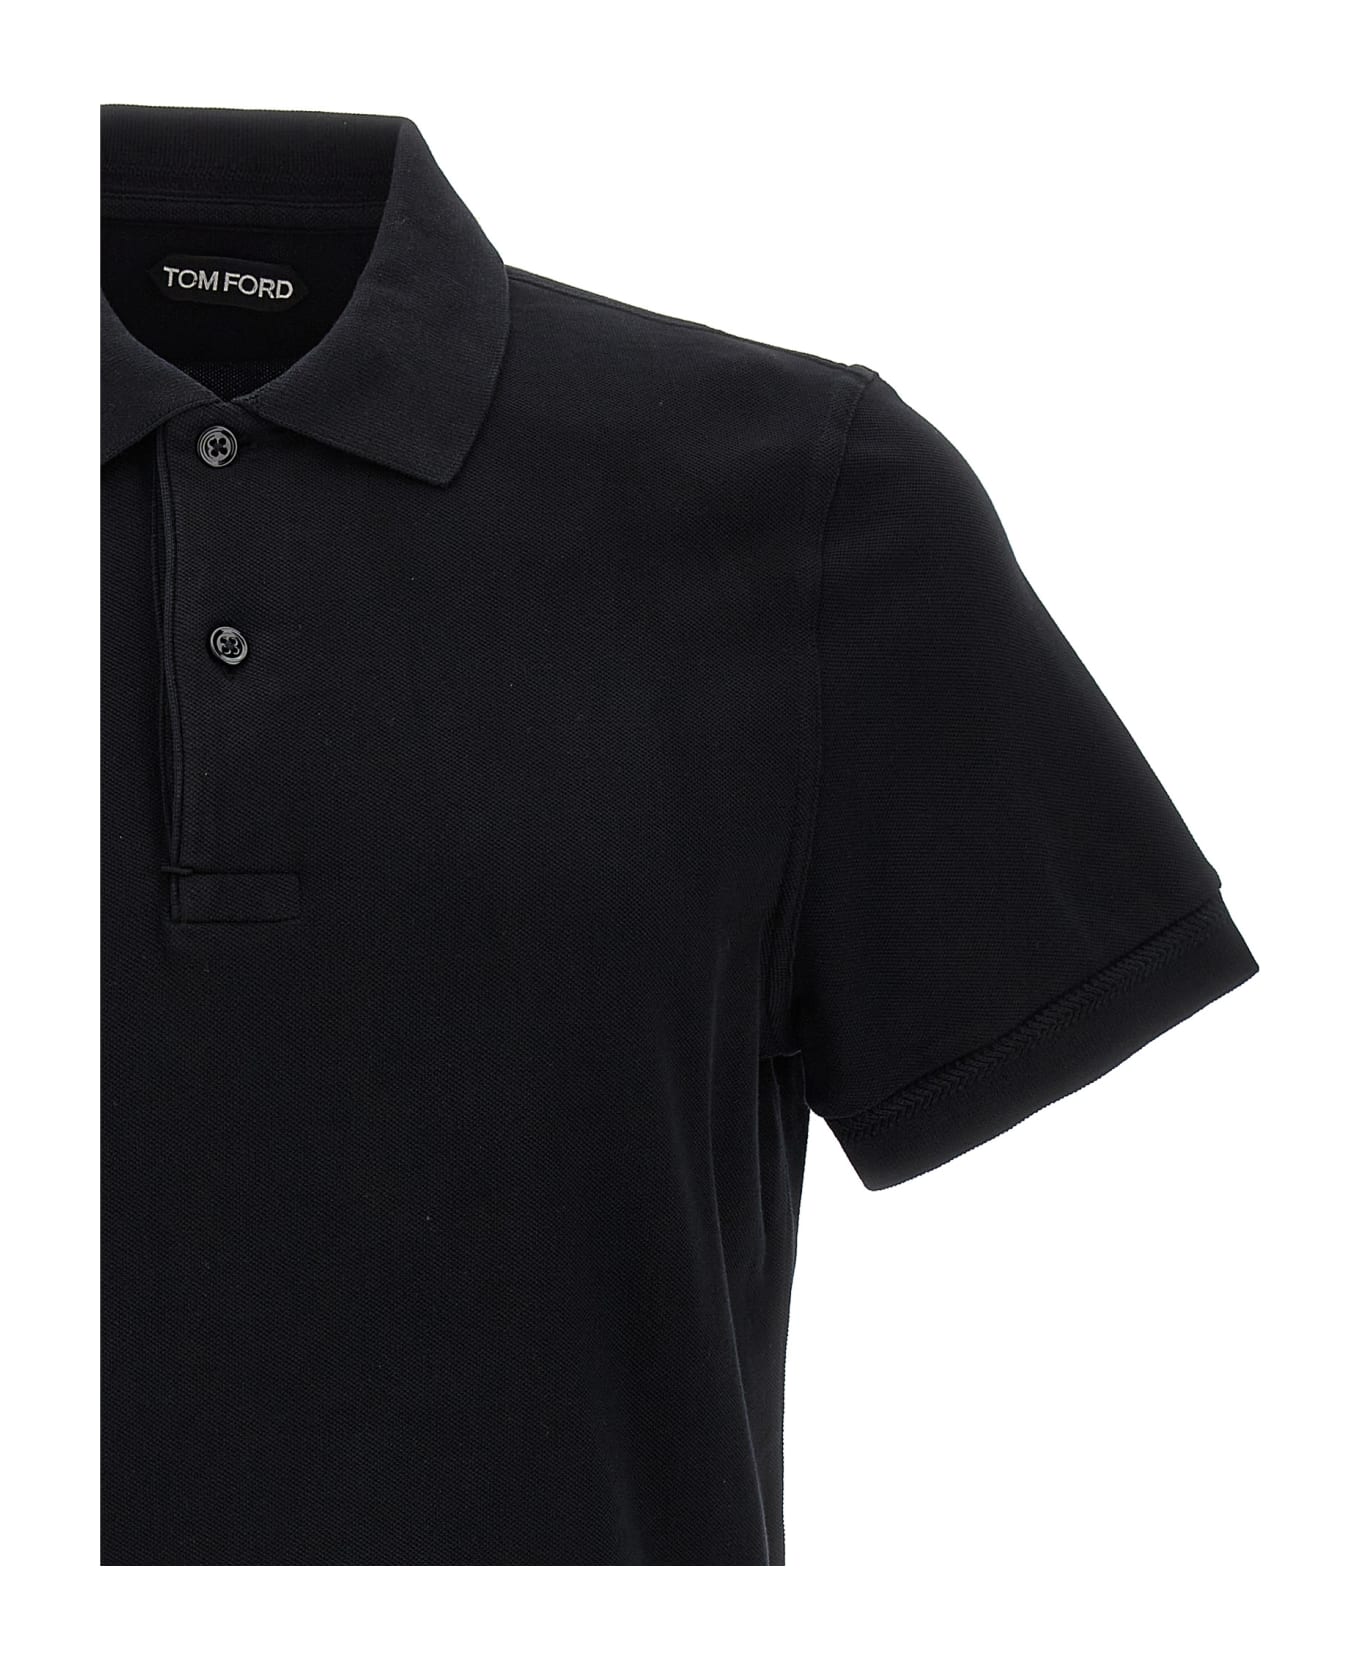 Tom Ford Logo Embroidery Polo Shirt - Black ポロシャツ